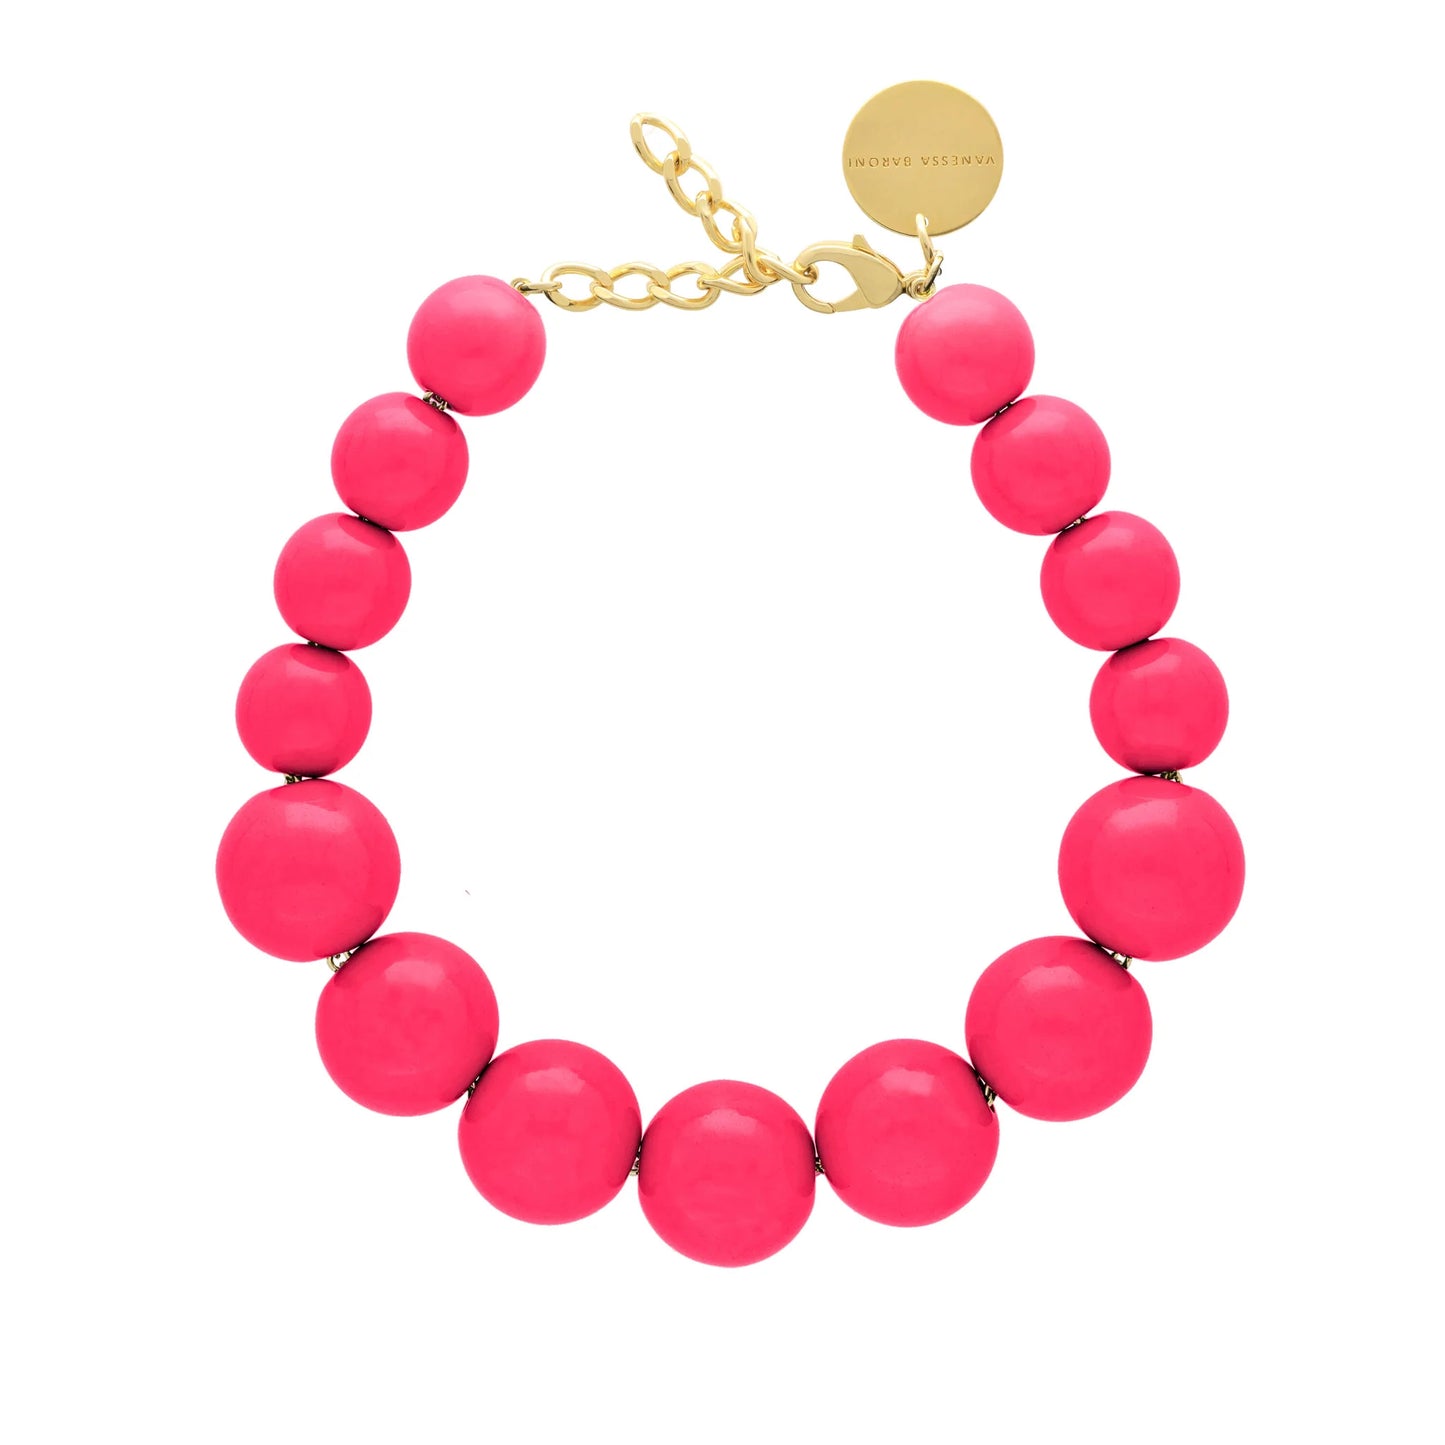 Vanessa Baroni - Beads Necklace in Pink